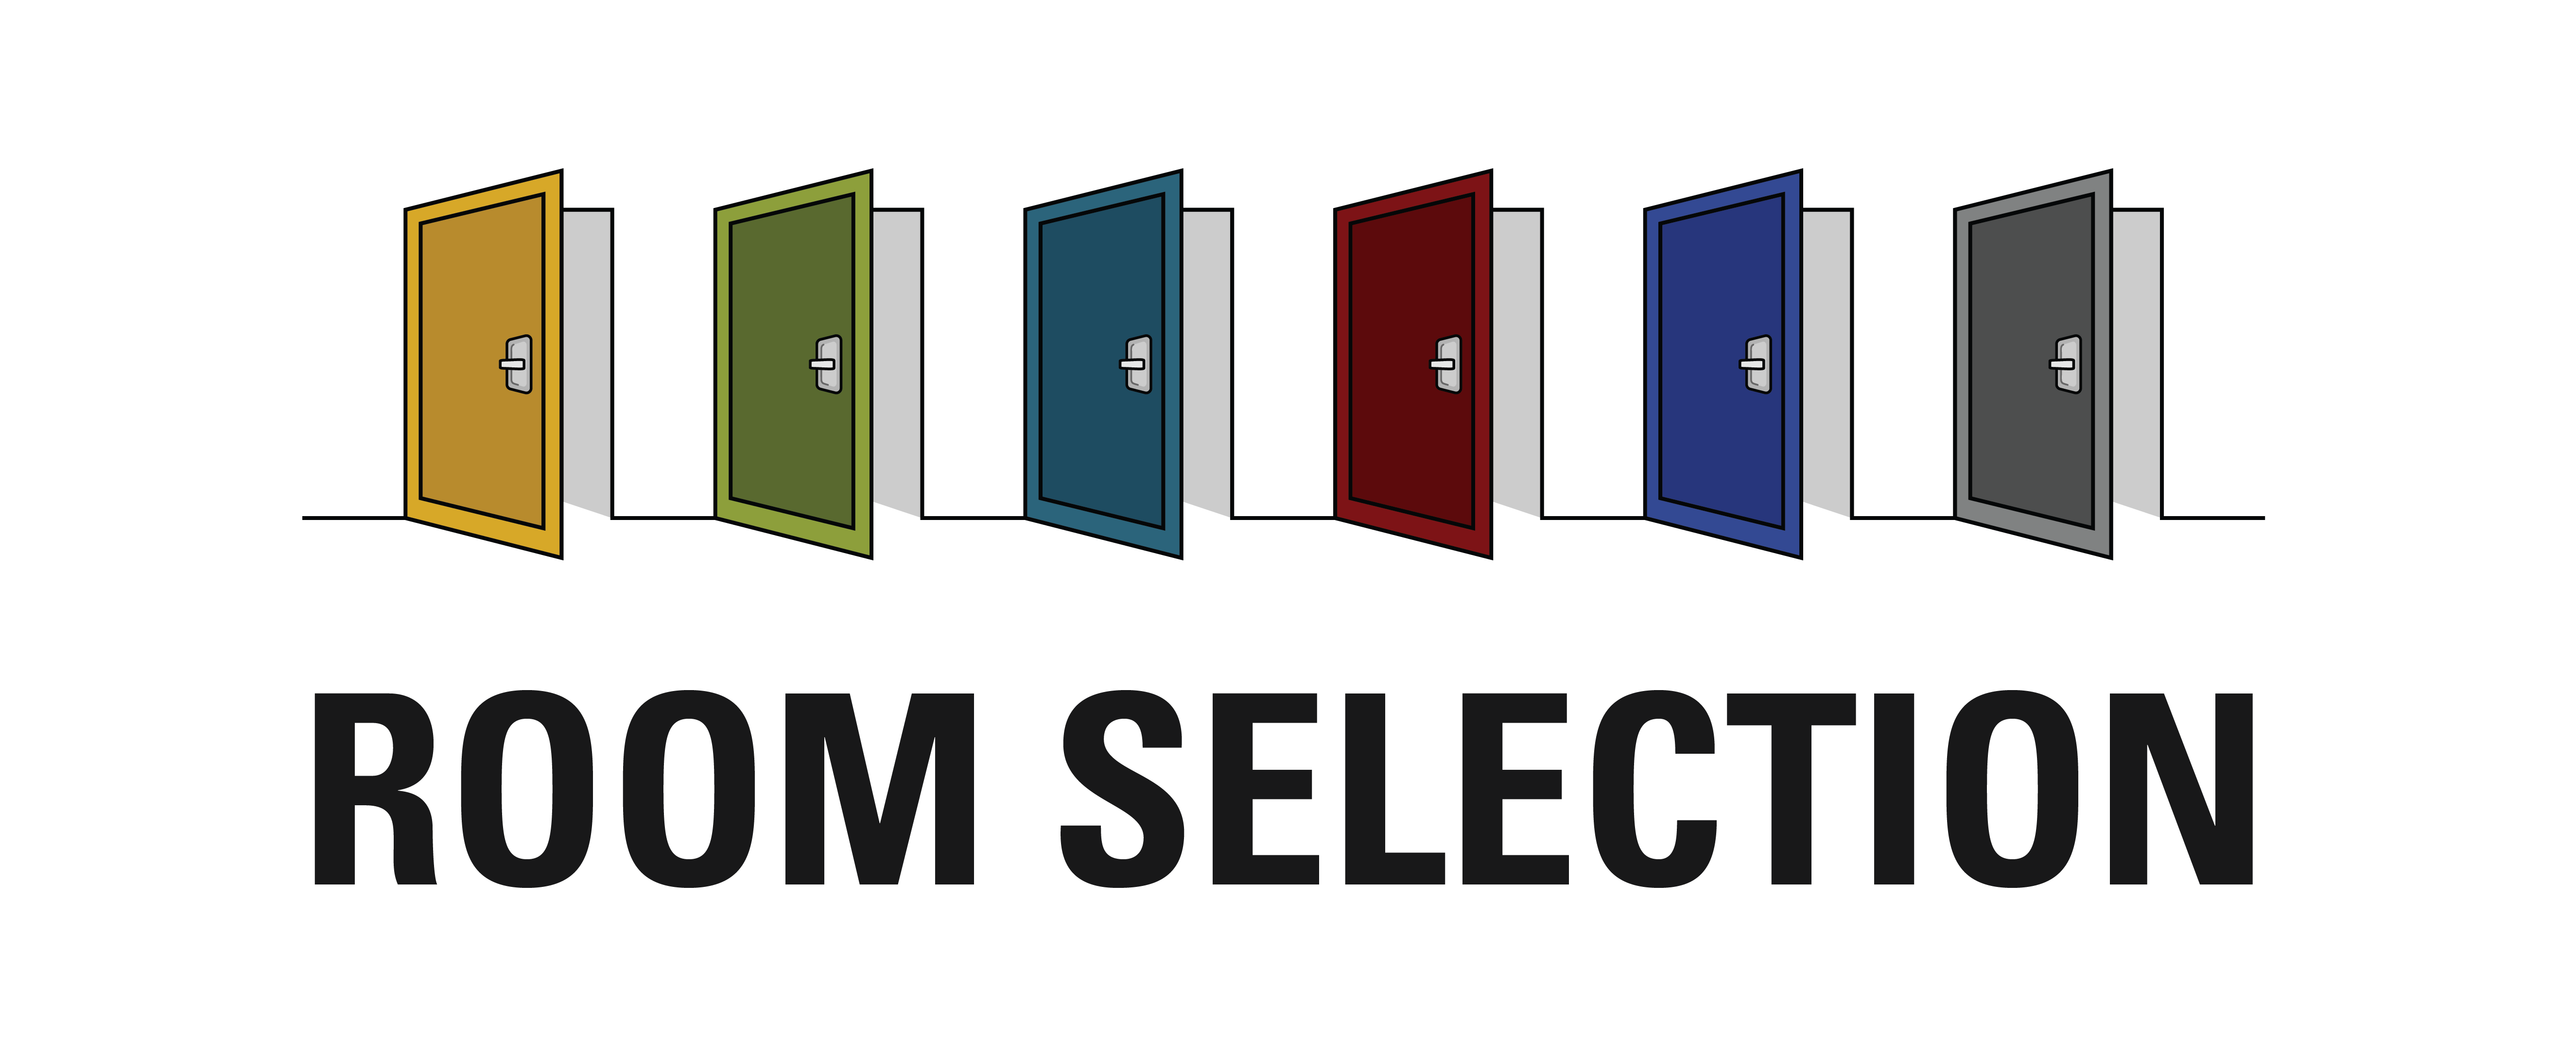 Doors of various bright colors and the words "Room Selection"